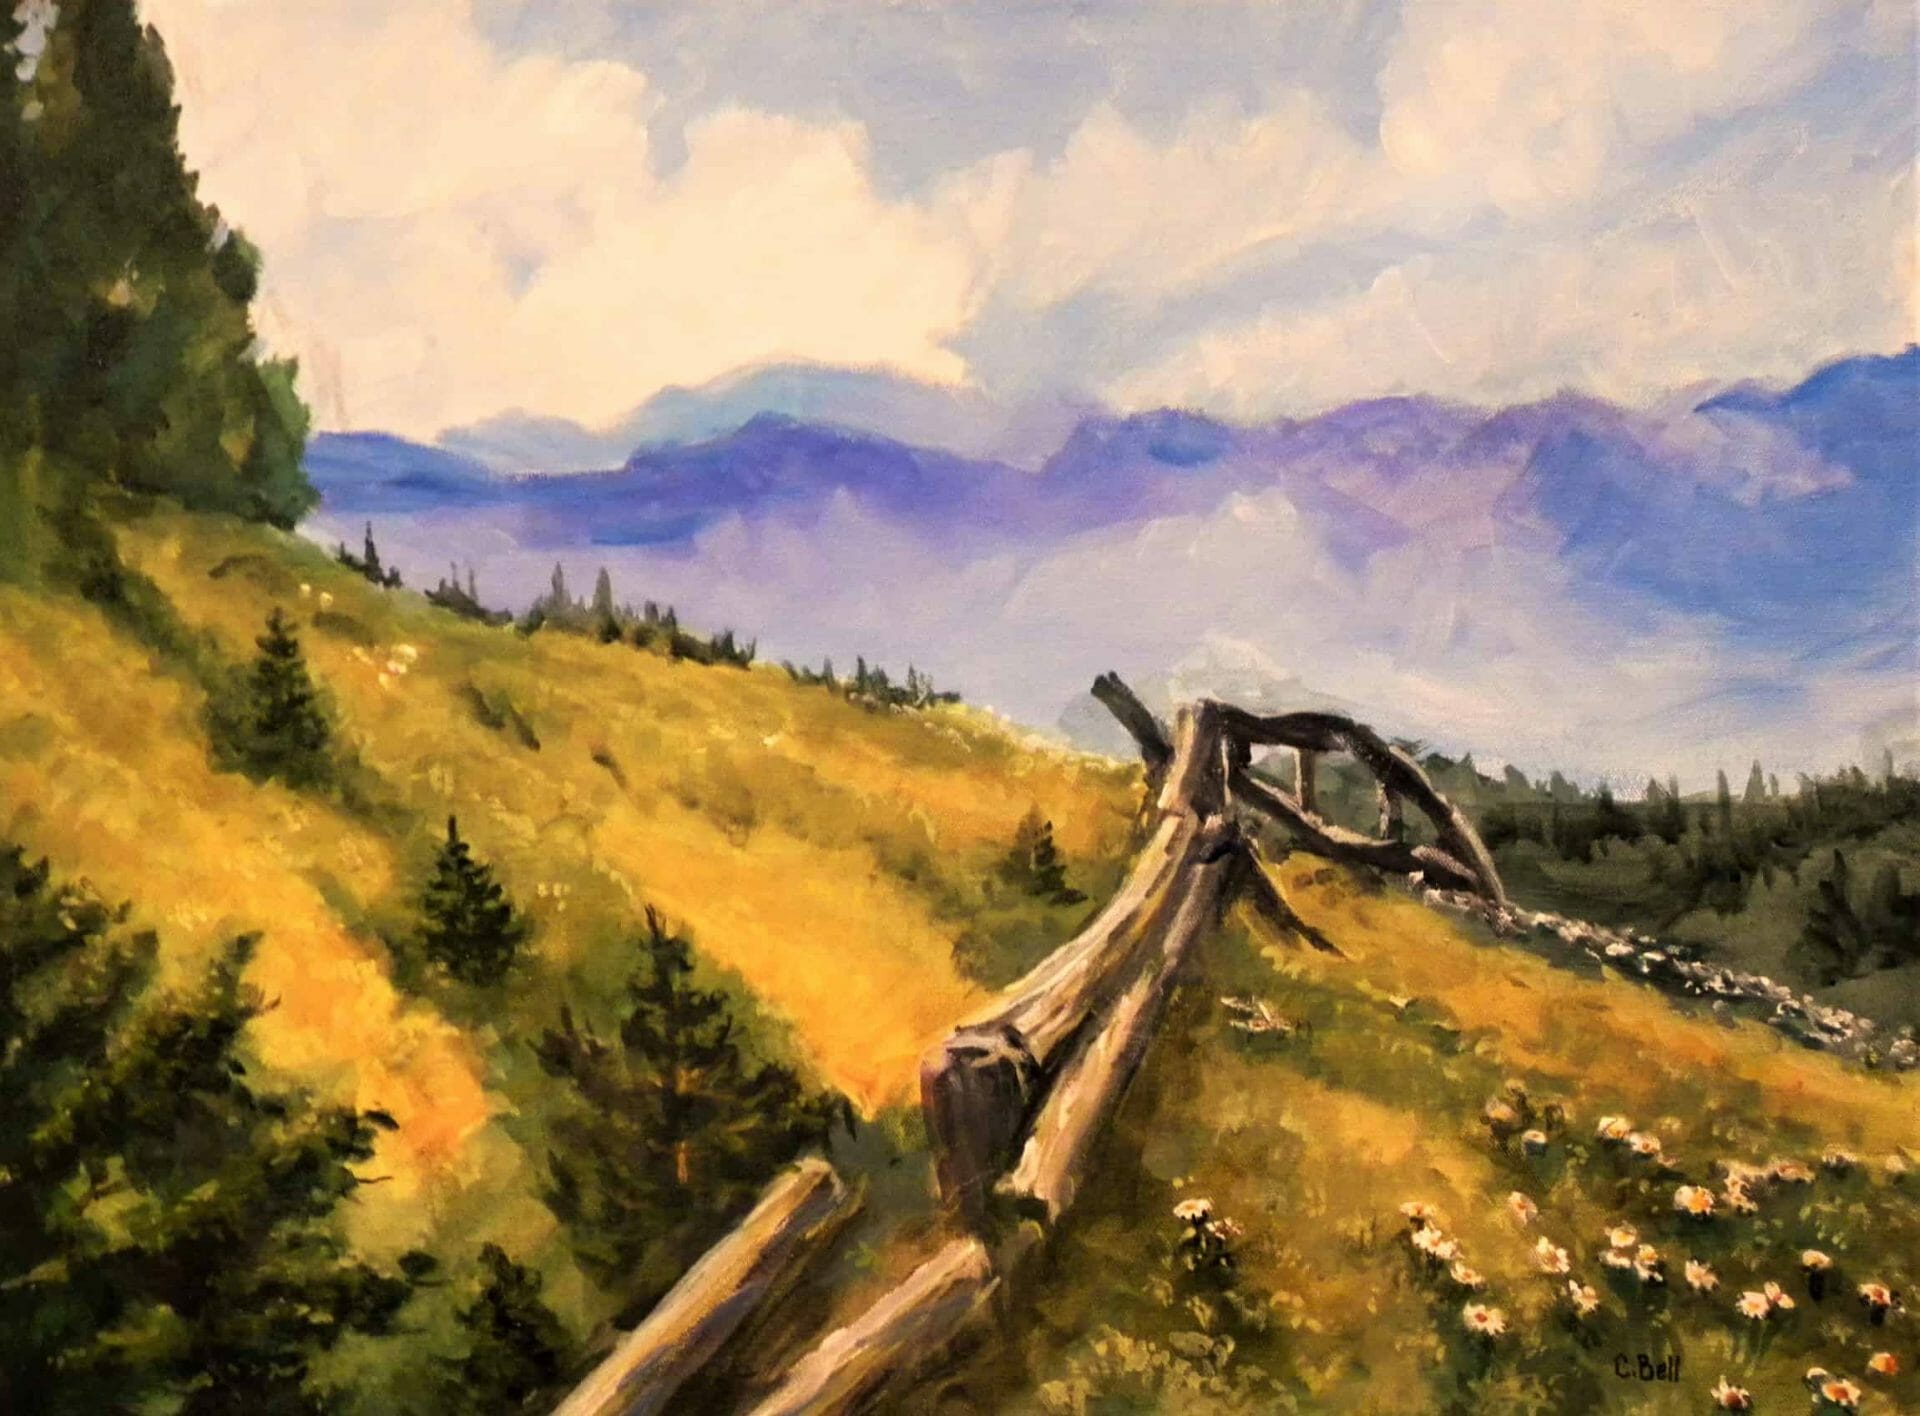 Broken Fence, Invermere [1091] - Canadian Original Artwork For Sale by Colin Bell - Calgary, AB Local Artist - Mountains